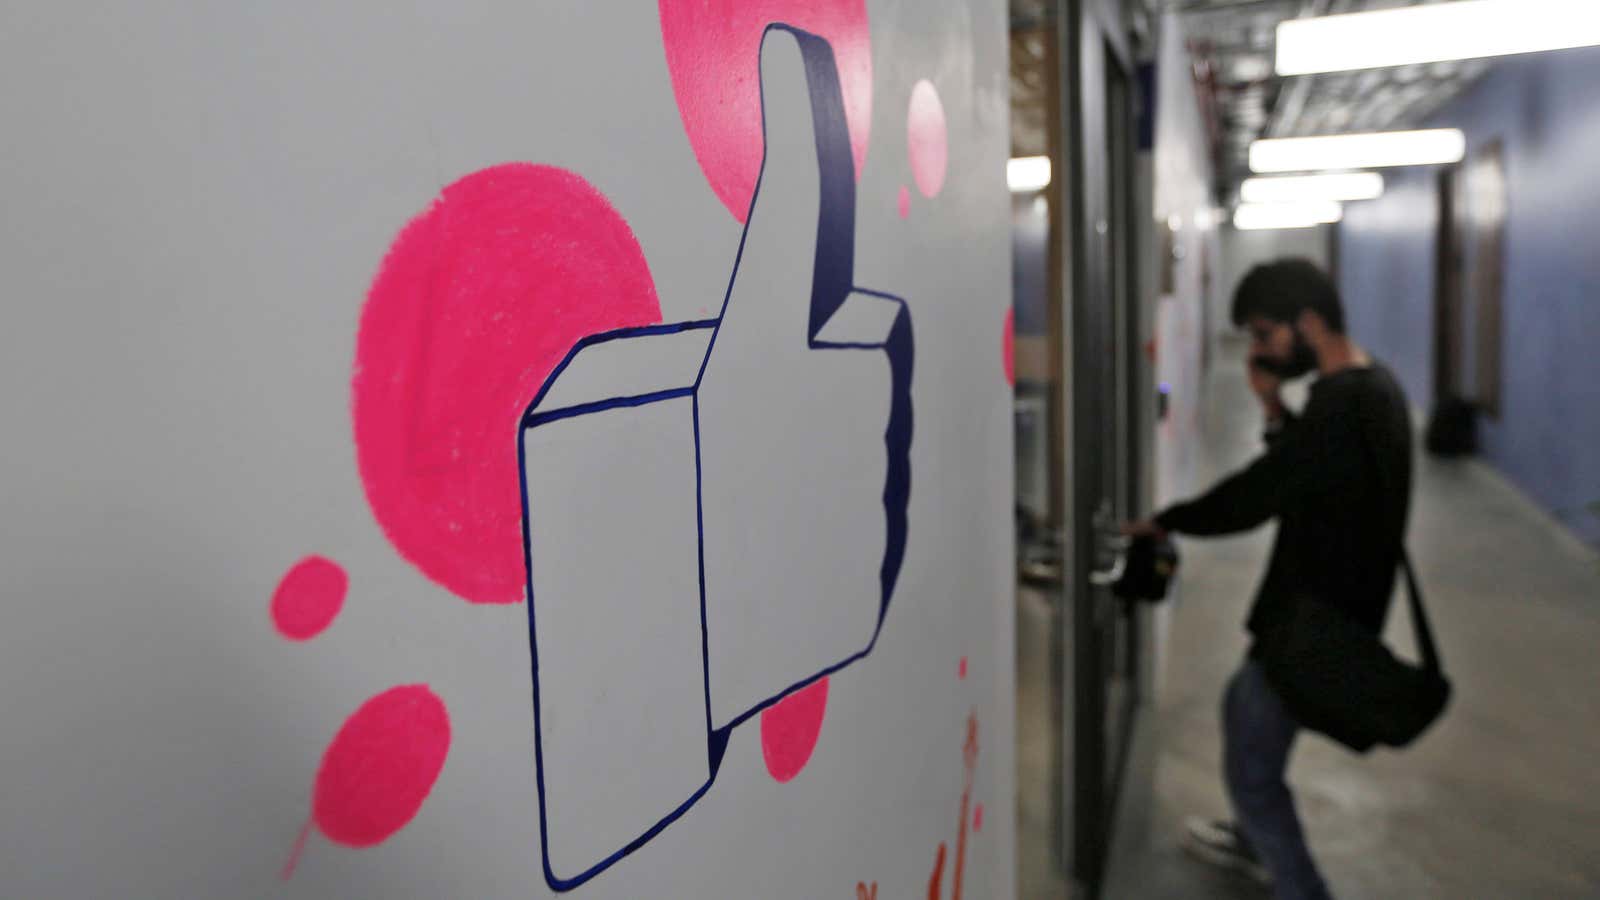 Will India open its doors for Facebook?